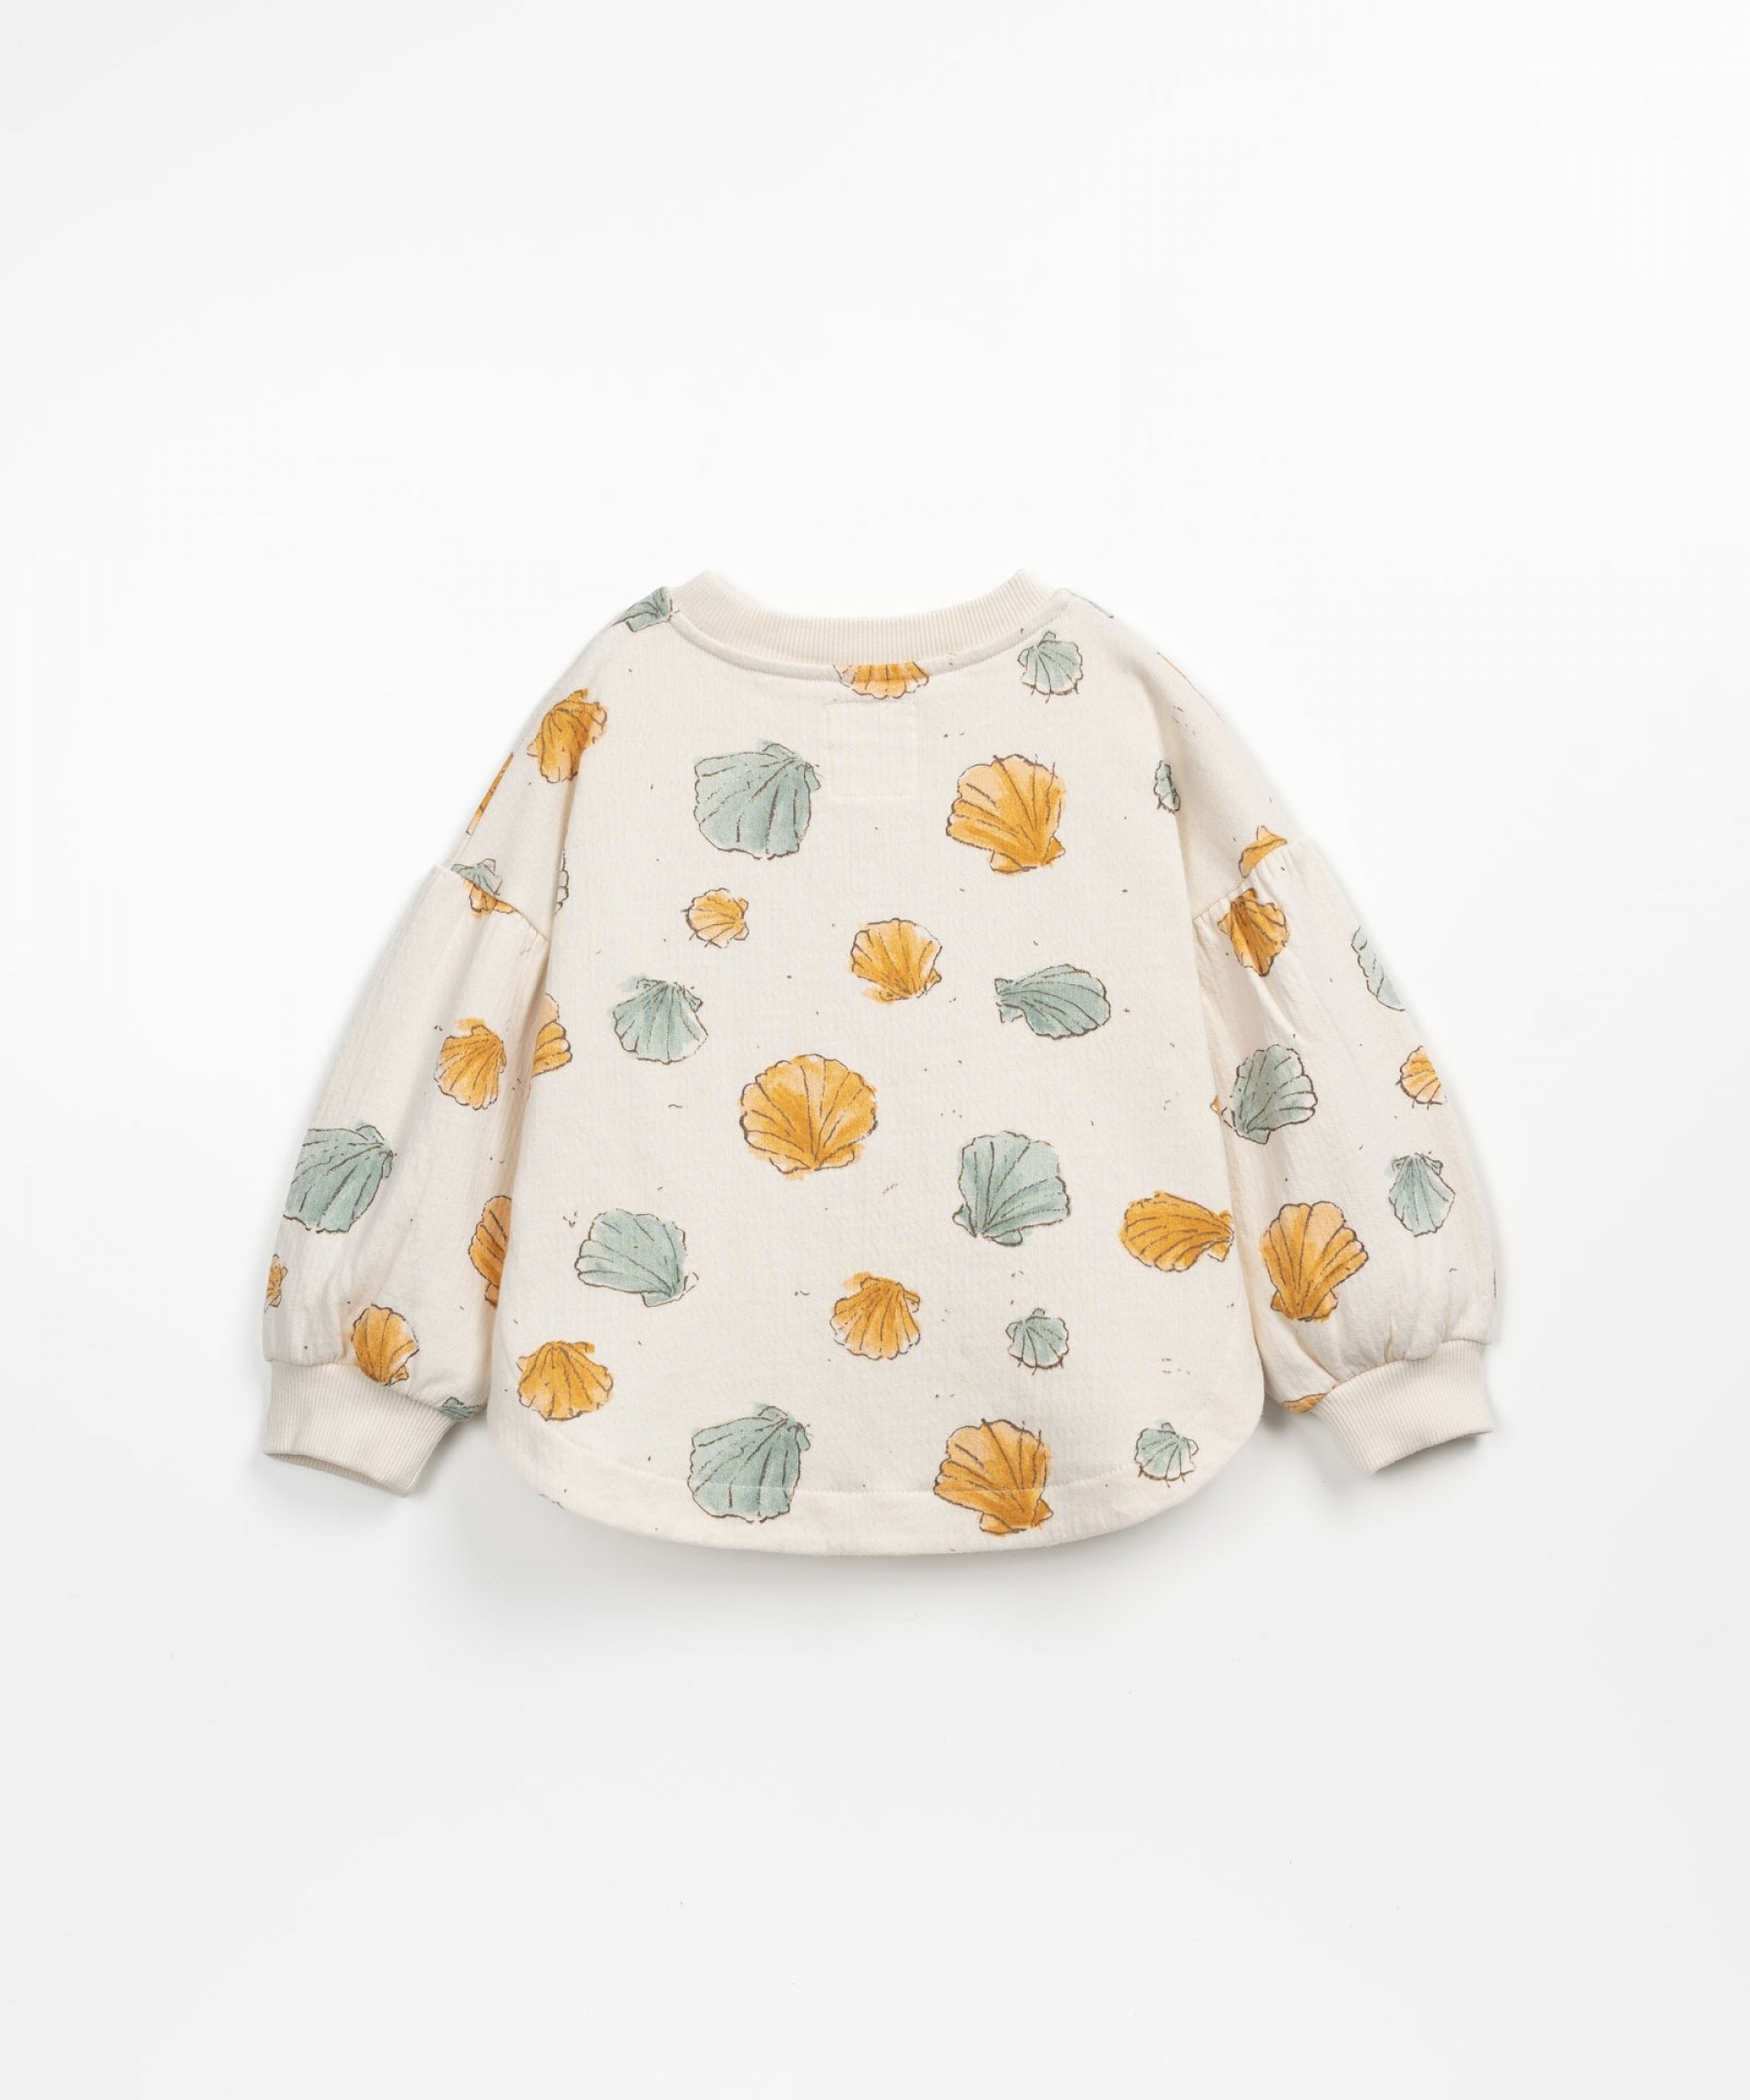 Sweater with seashell print | Textile Art